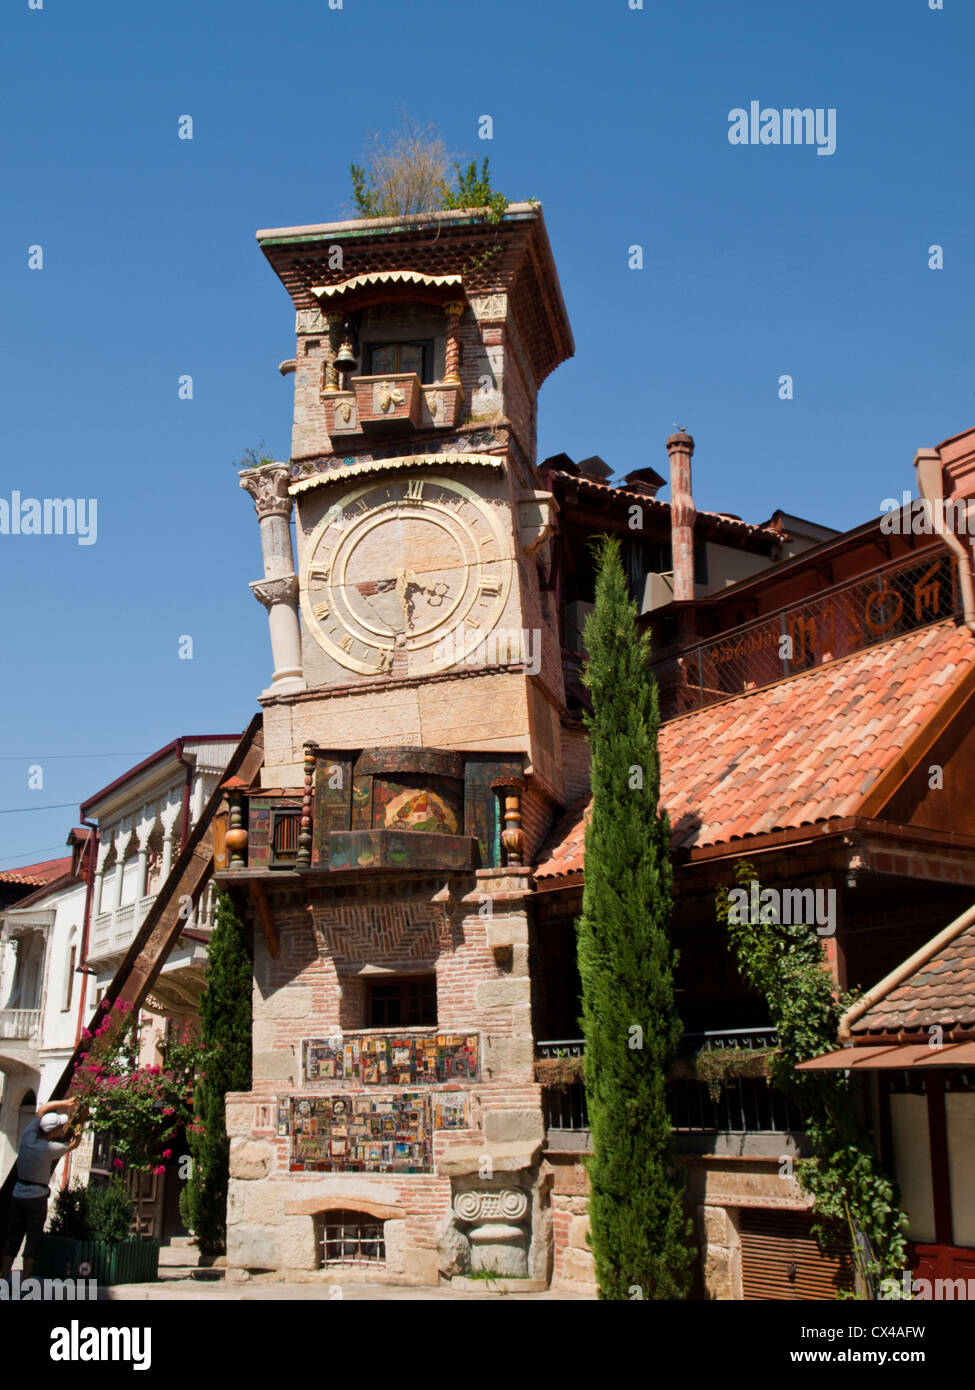 Puppet theater and clock tower in Tbilisi Stock Photo